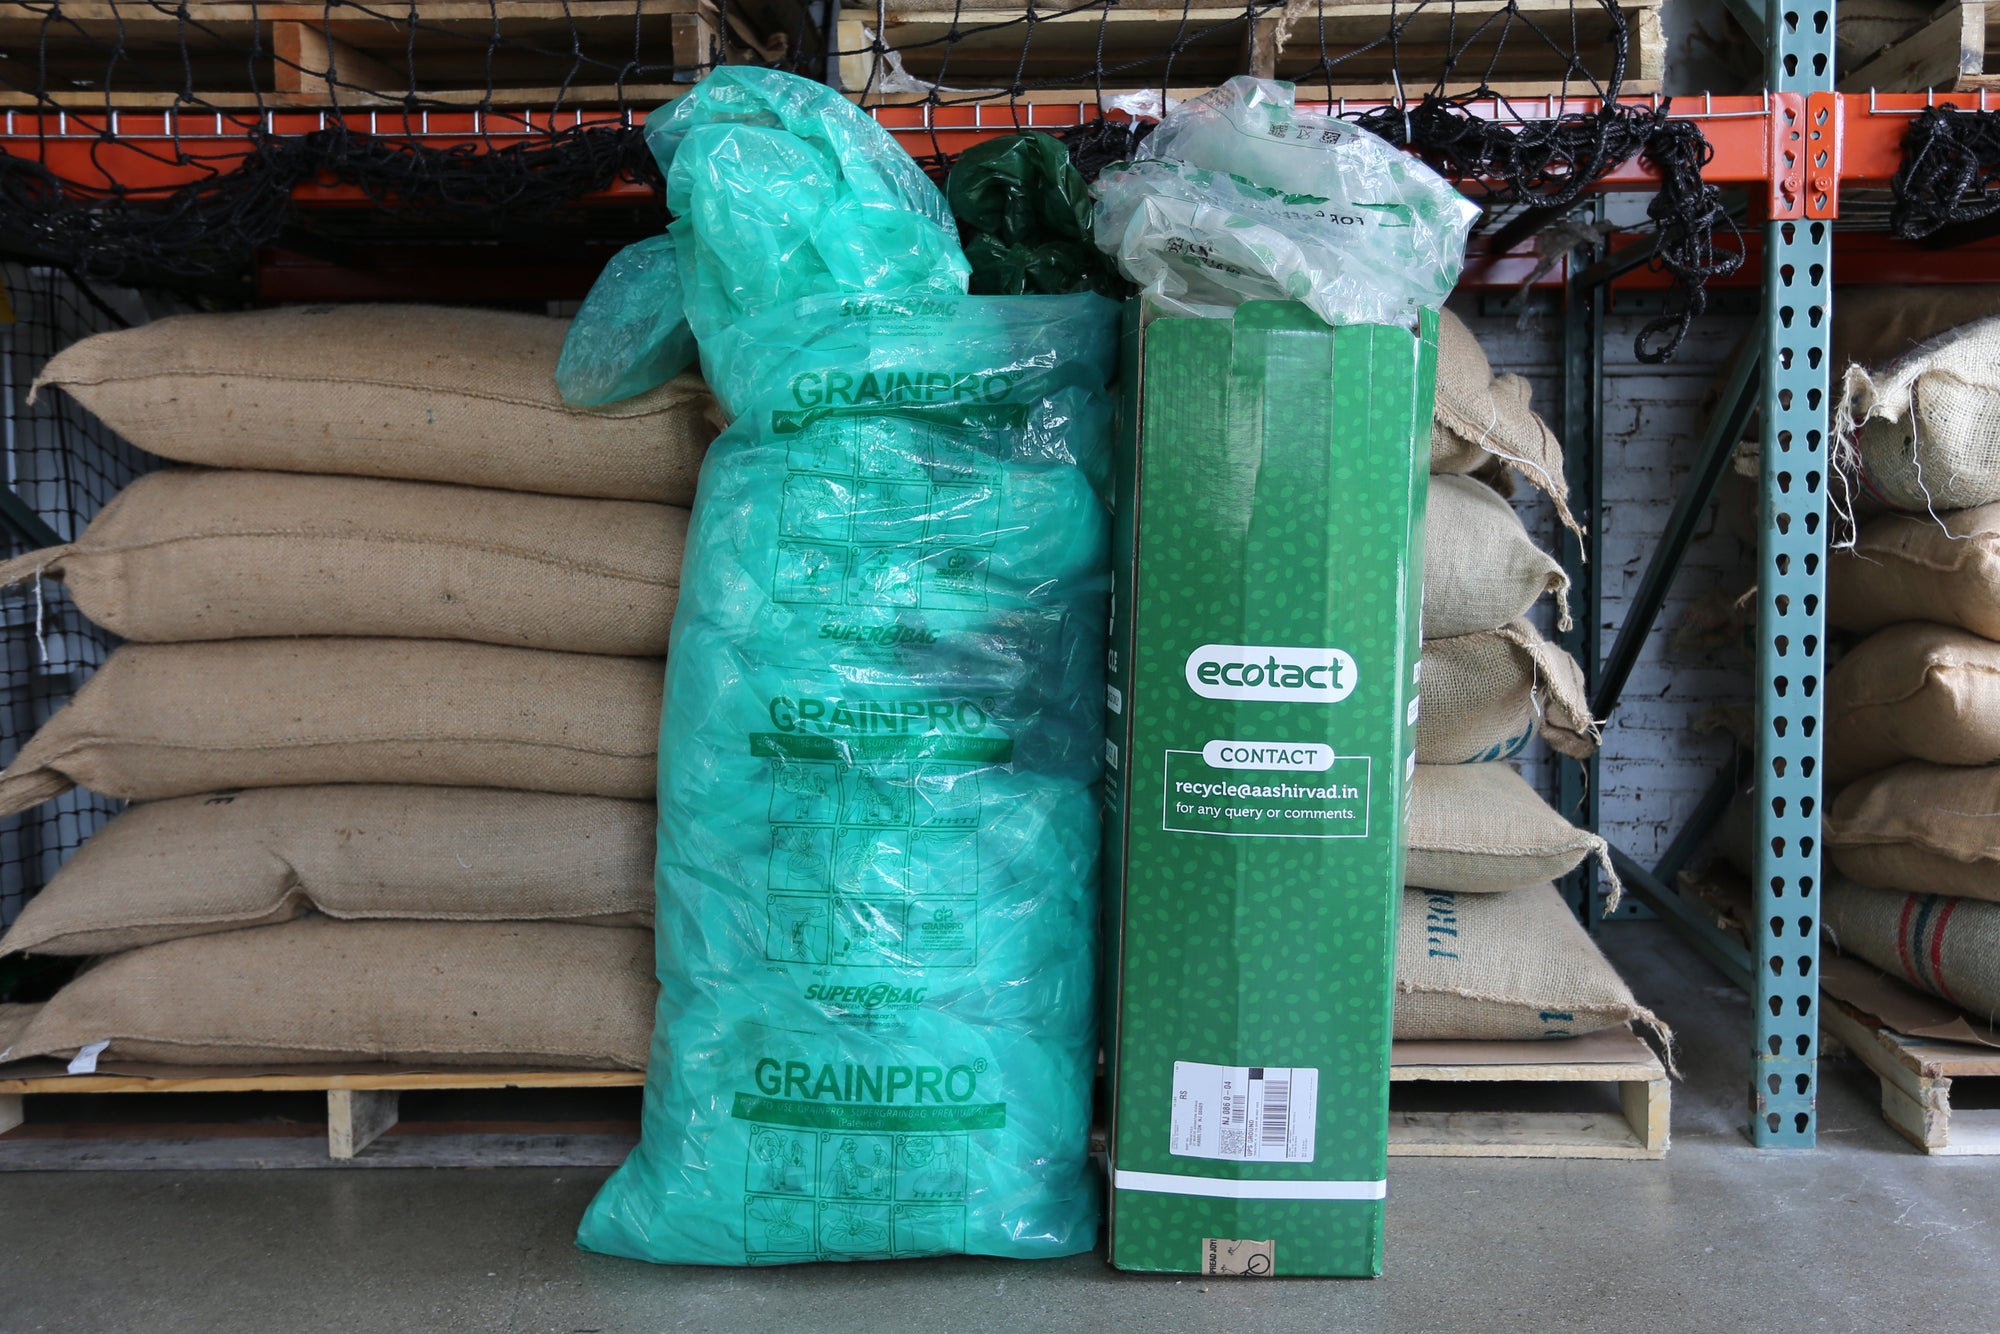 Stacks of grainpro bags and a box labeled "ecotact" in a warehouse setting, used for storing agricultural products to preserve freshness and prevent spoilage.